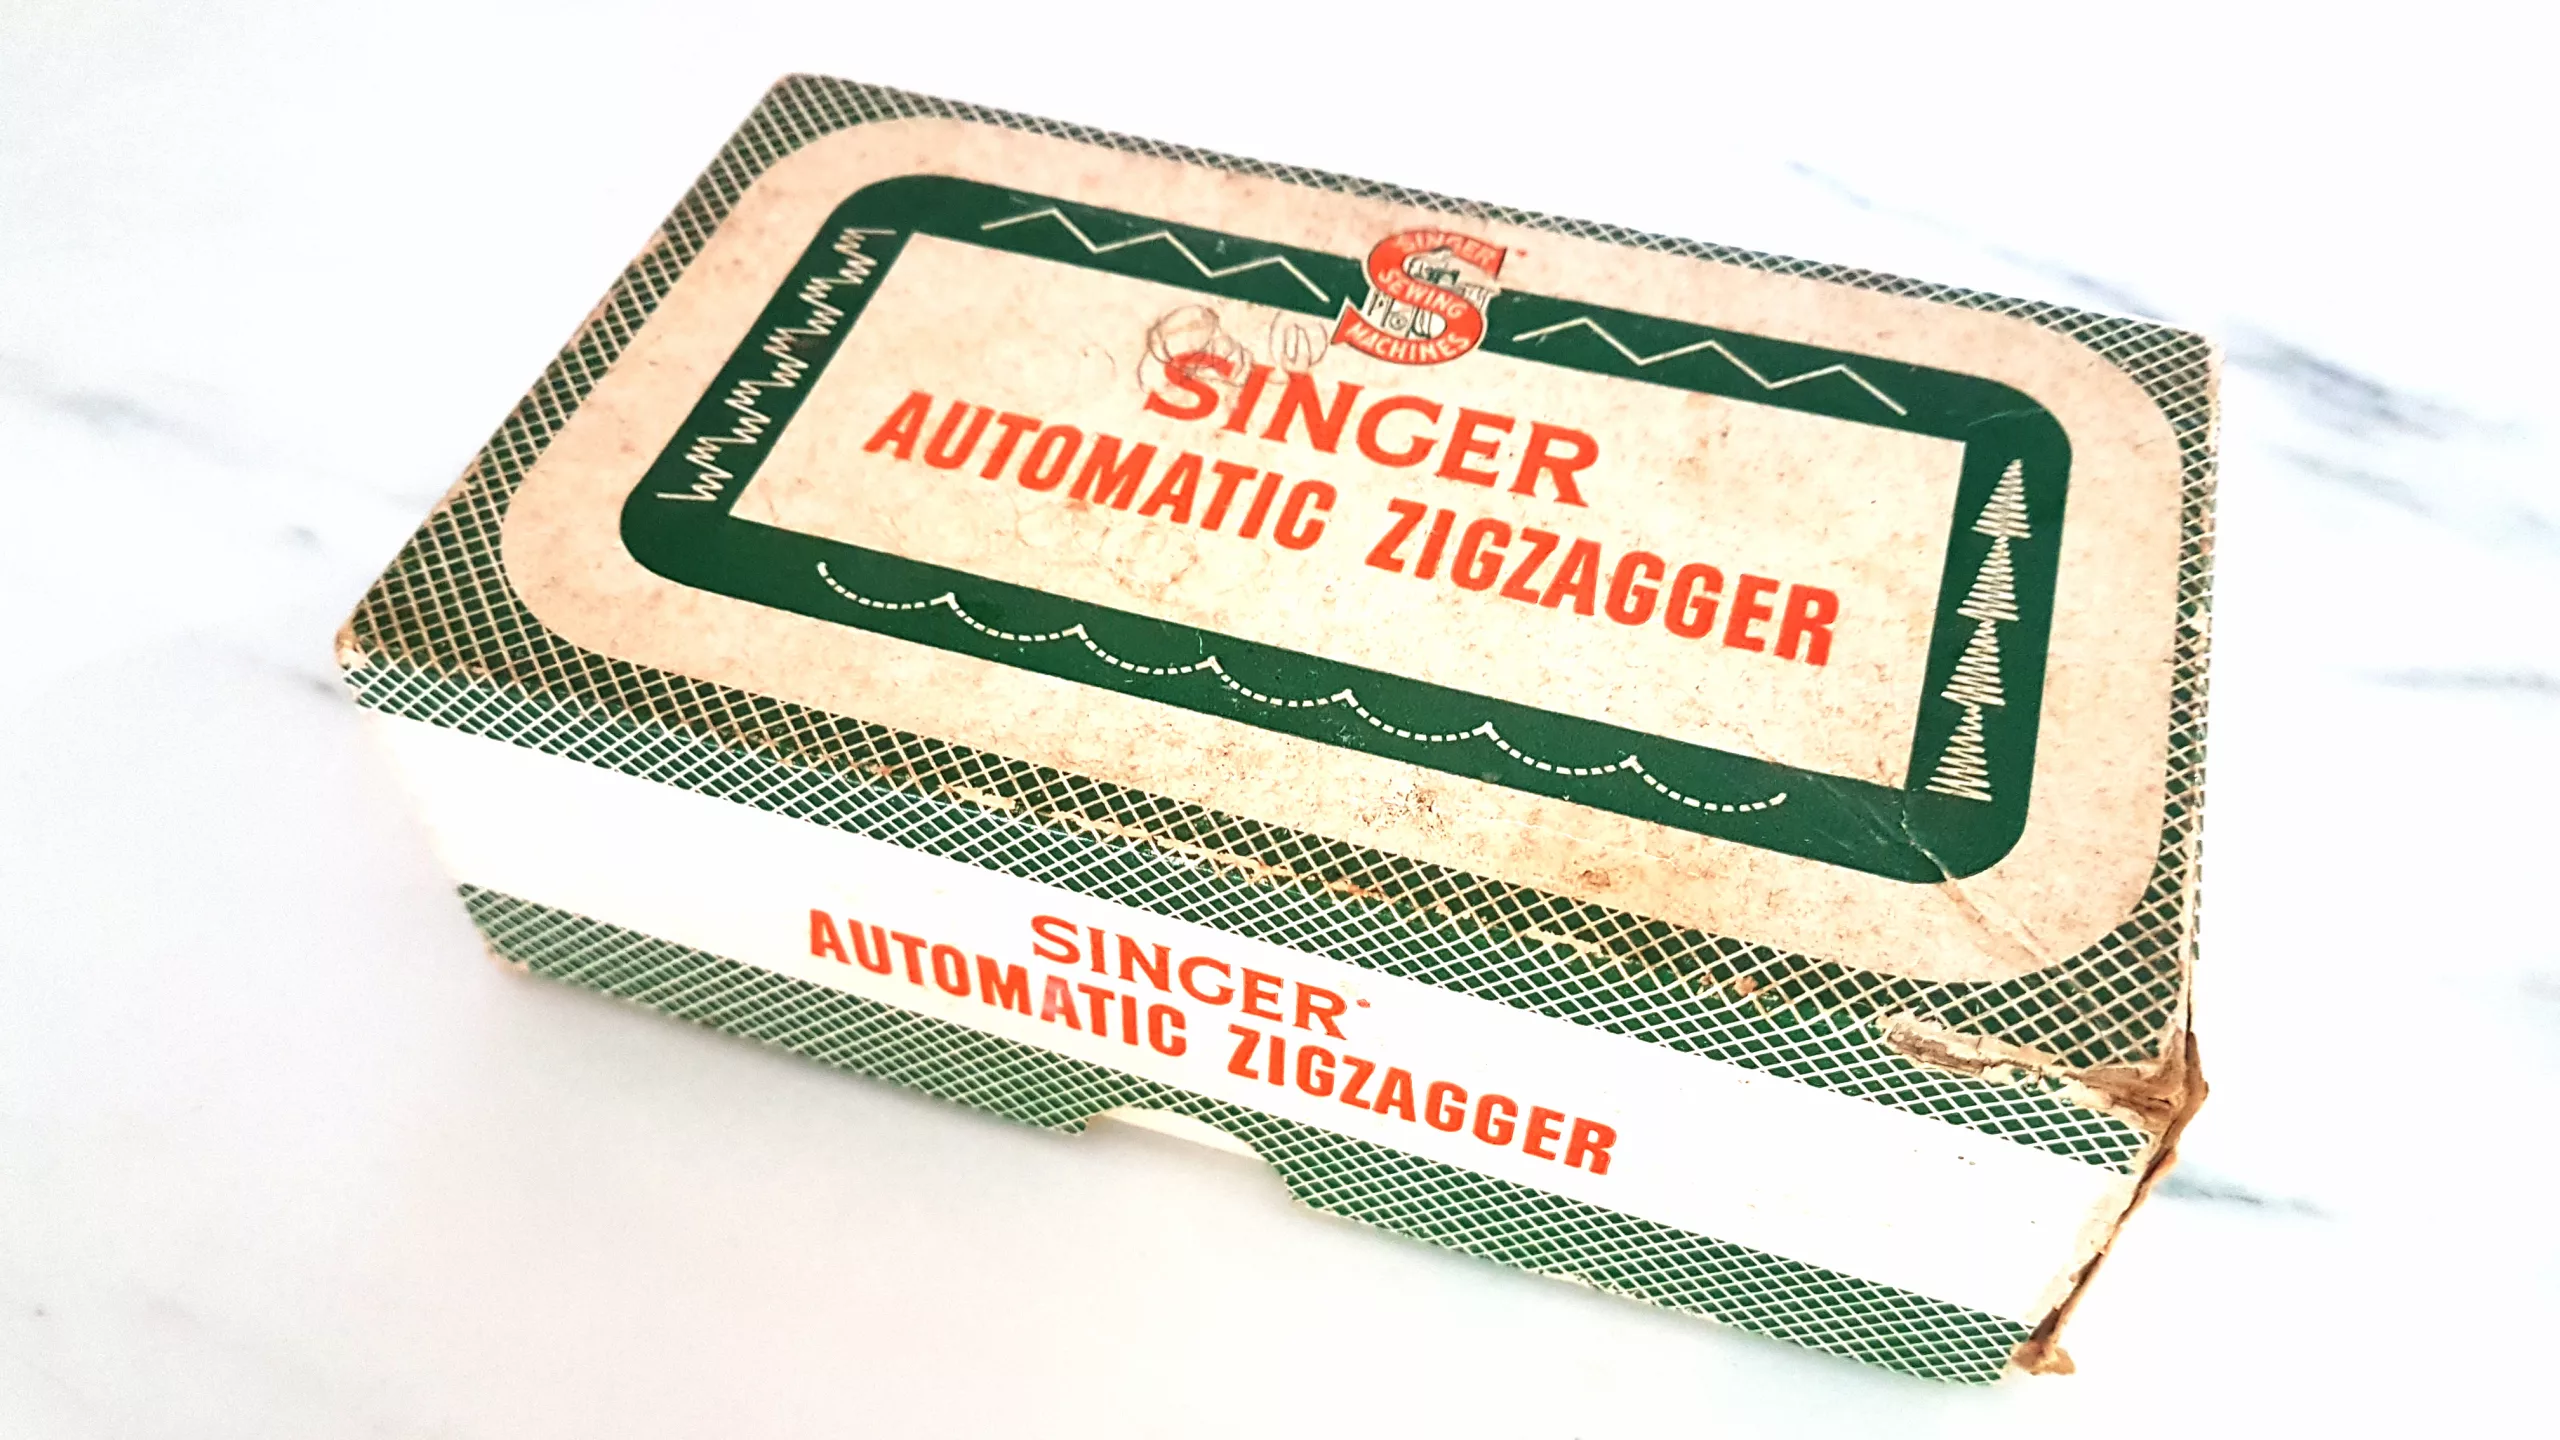 Box containing a Singer Automatic Zigzagger vintage attachment